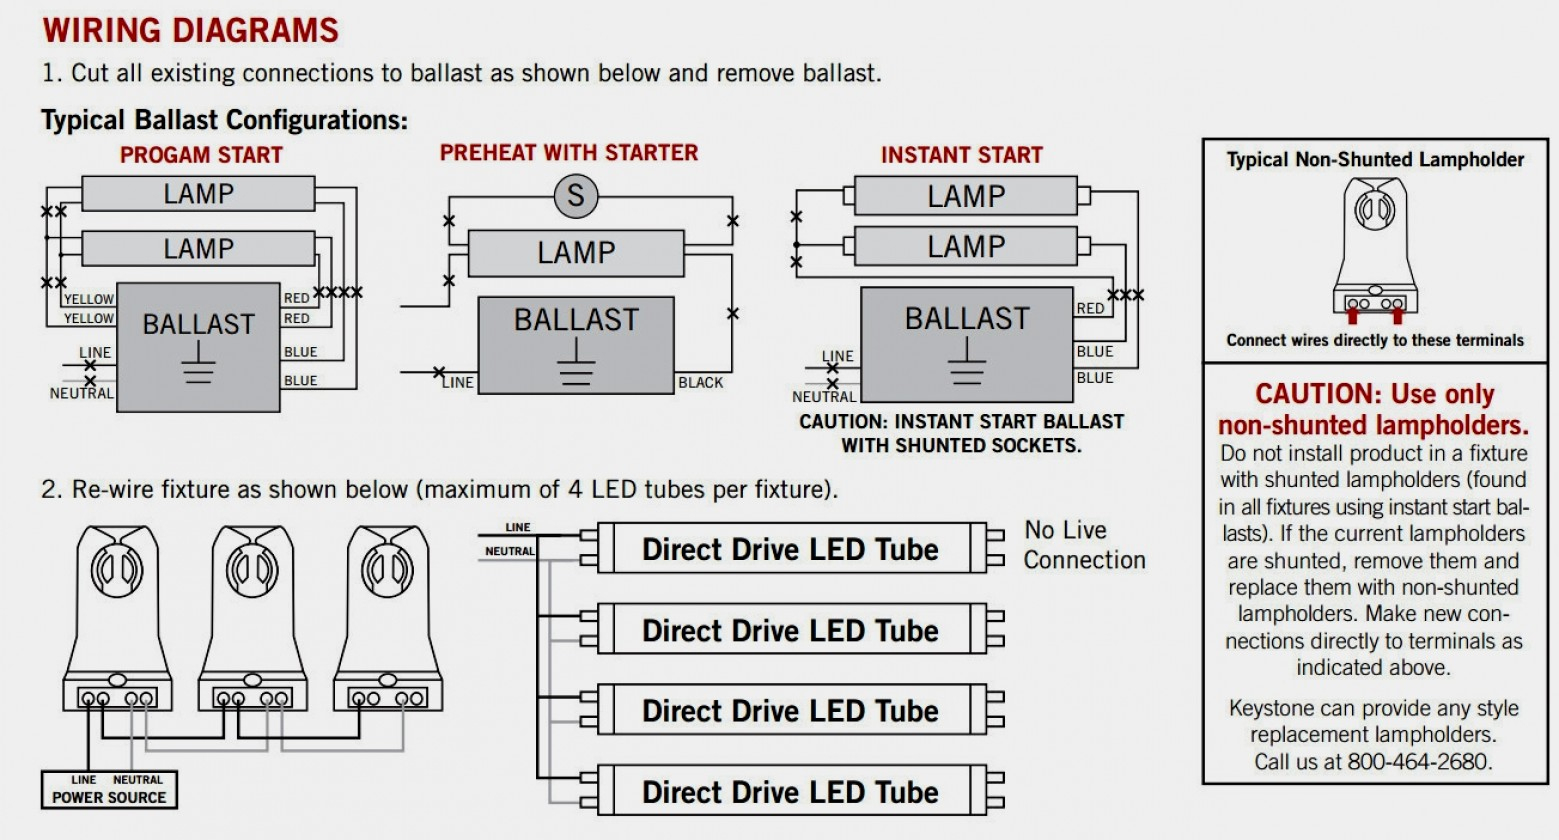 Led Fluorescent Replacement Wiring Diagram | Wiring Diagram - Led Fluorescent Tube Replacement Wiring Diagram